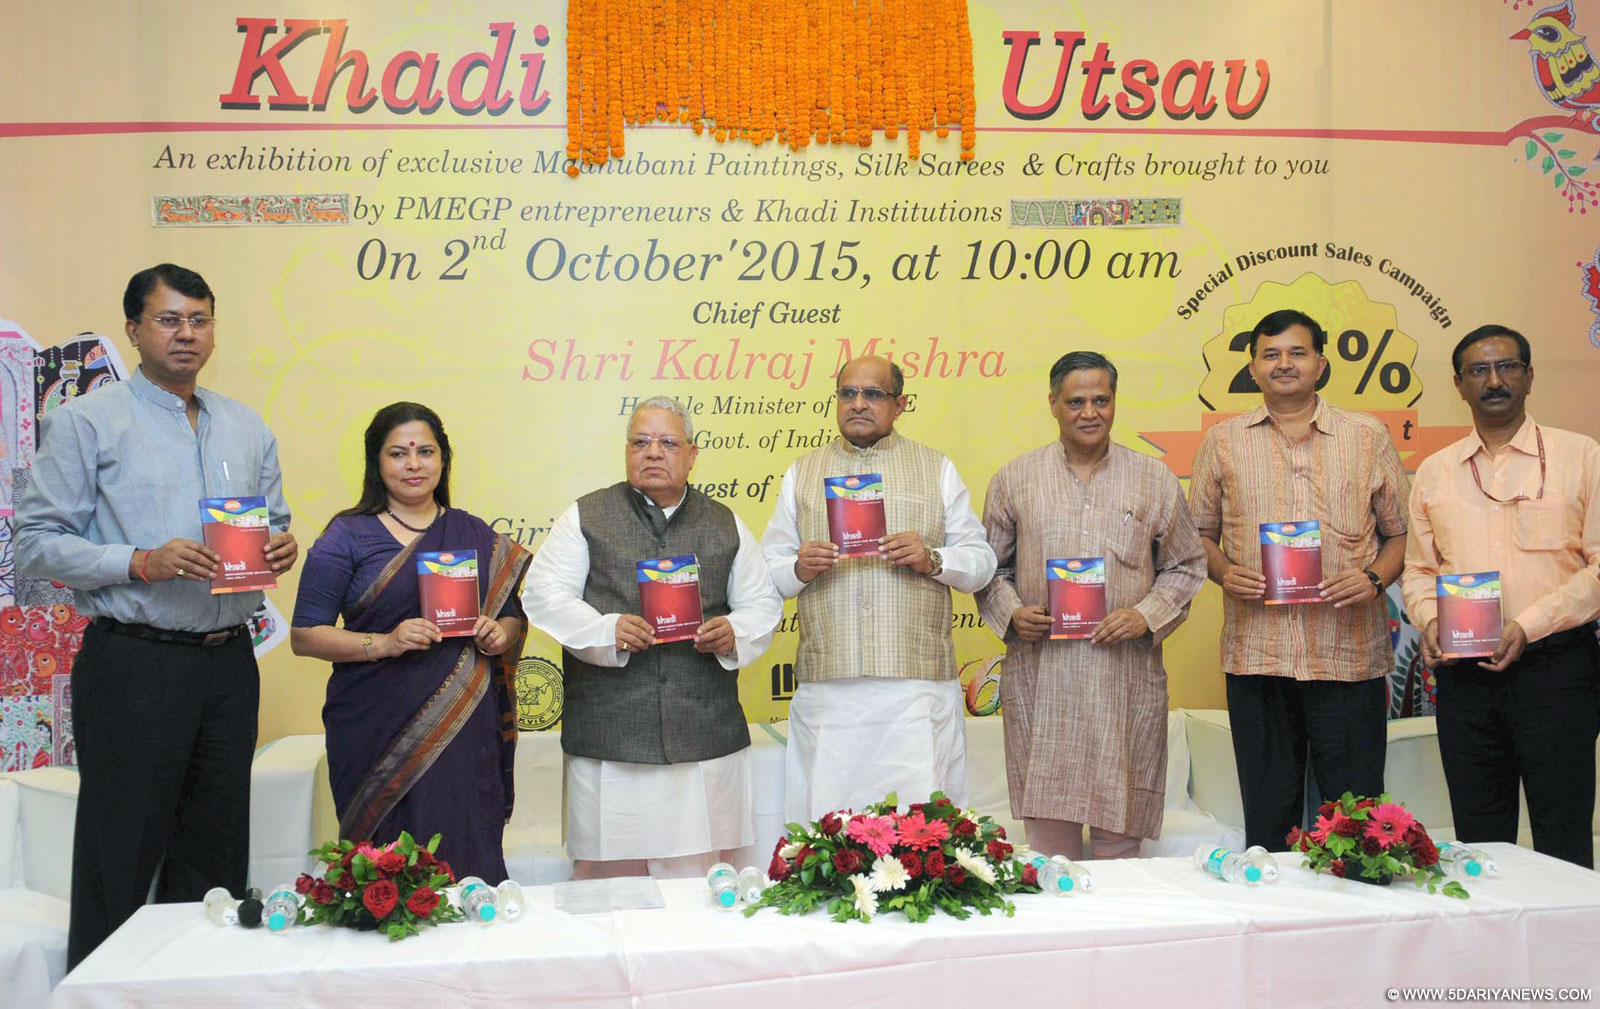 The Union Minister for Micro, Small and Medium Enterprises, Kalraj Mishra releasing the publication at the launch of the Special Sales Campaign and “Khadi Utsav”, on the occasion of Gandhi Jayanti, in New Delhi on October 02, 2015. The Secretary, Ministry of Micro, Small & Medium Enterprises, Dr. Anup K. Pujari AND other dignitaries are also seen.